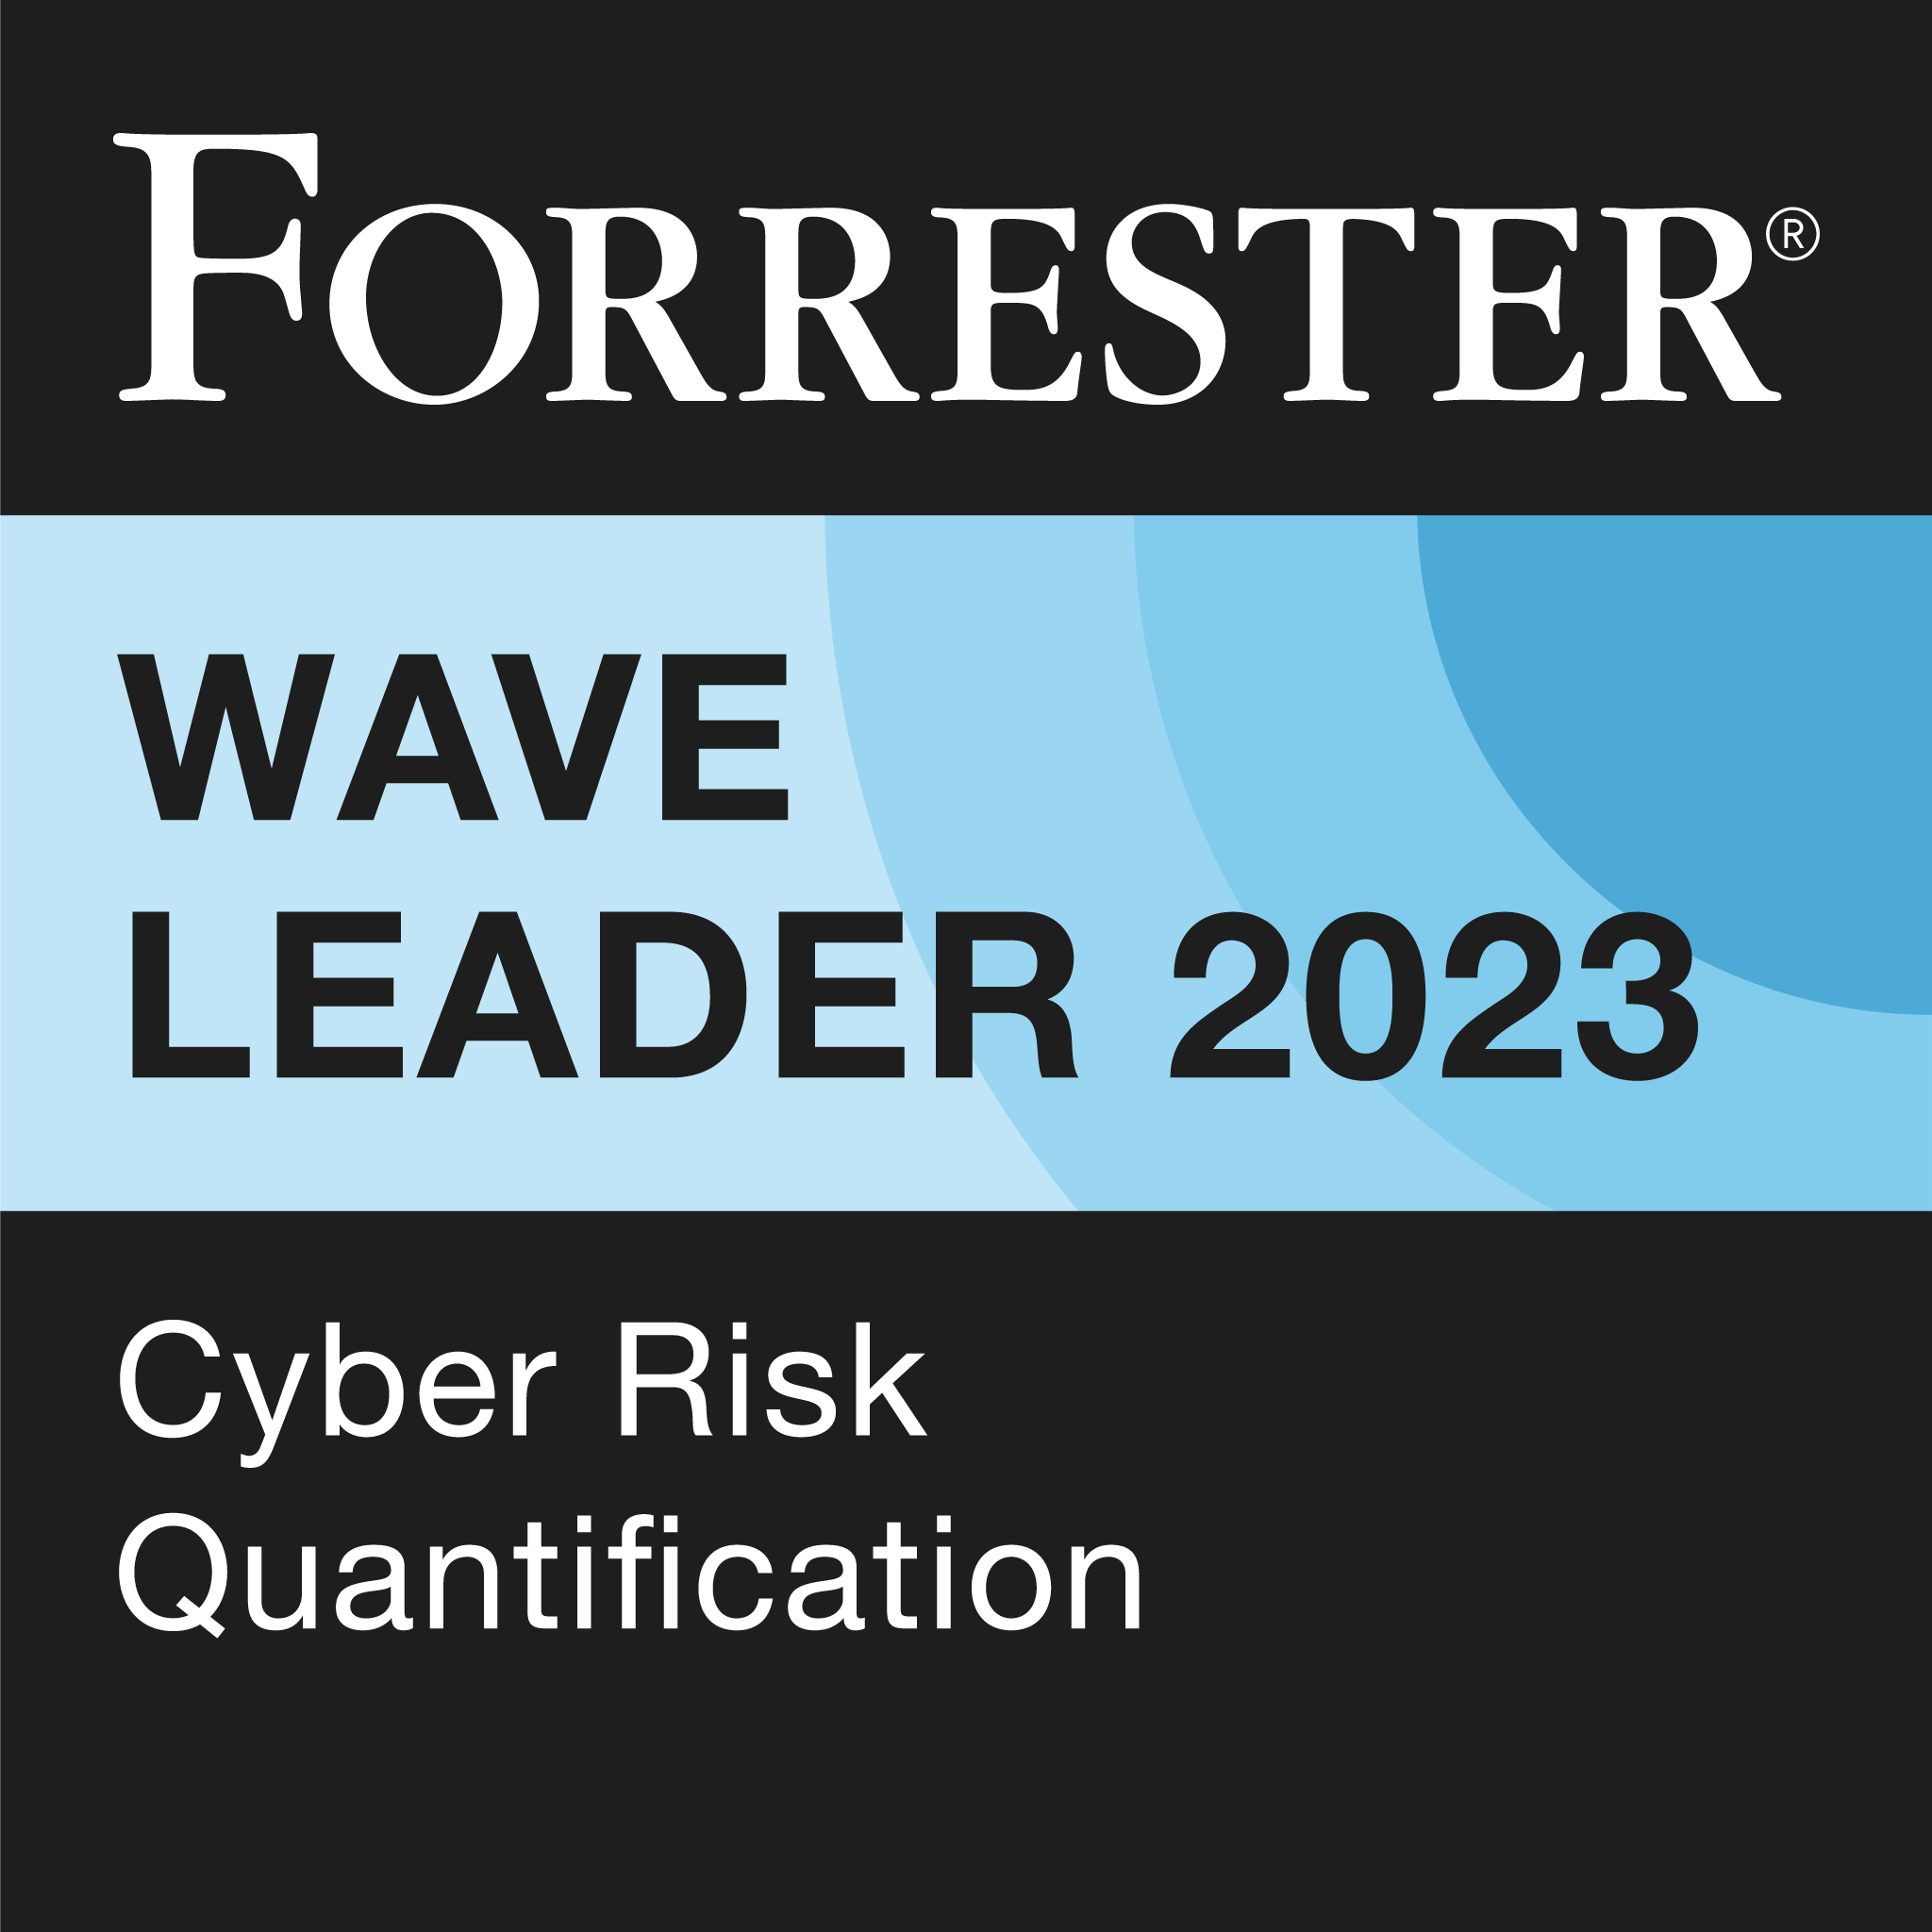 ThreatConnect Risk Quantifier is Named a Leader in the Forrester Wave for Cyber Risk Quantification Q3 2023 report